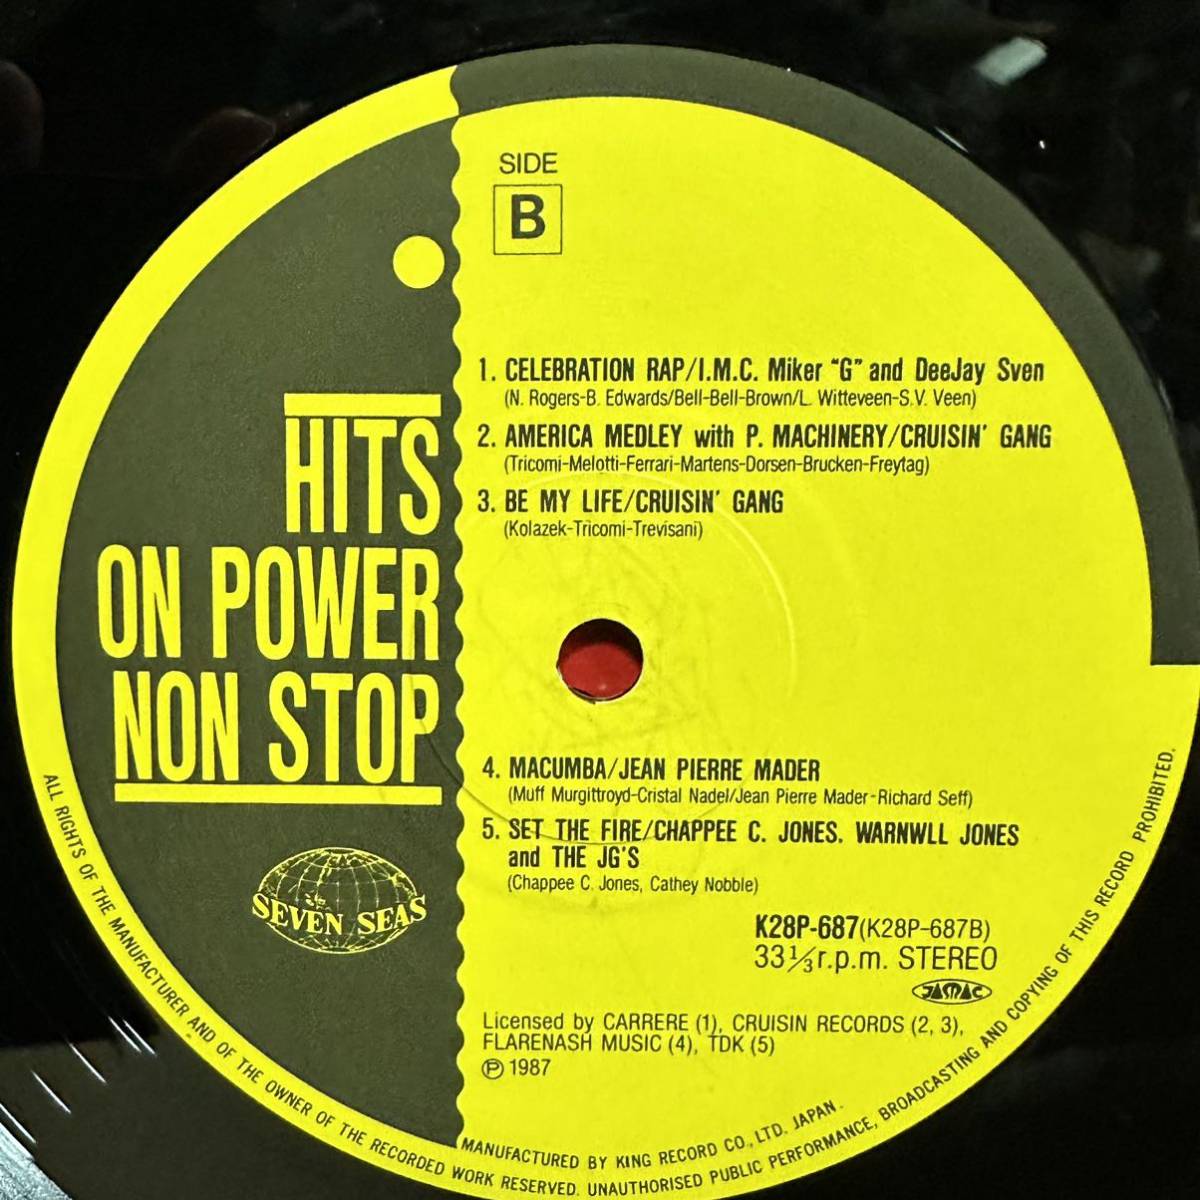 【LP】 Hits On Power Non Stop　※ KAMIKAZE (GIVE ME UP フランス語カバー) / LIONEL KAZAN ☆ SET THE FIRE ☆ BE MY LIFE 他　JG'S MIX_画像6